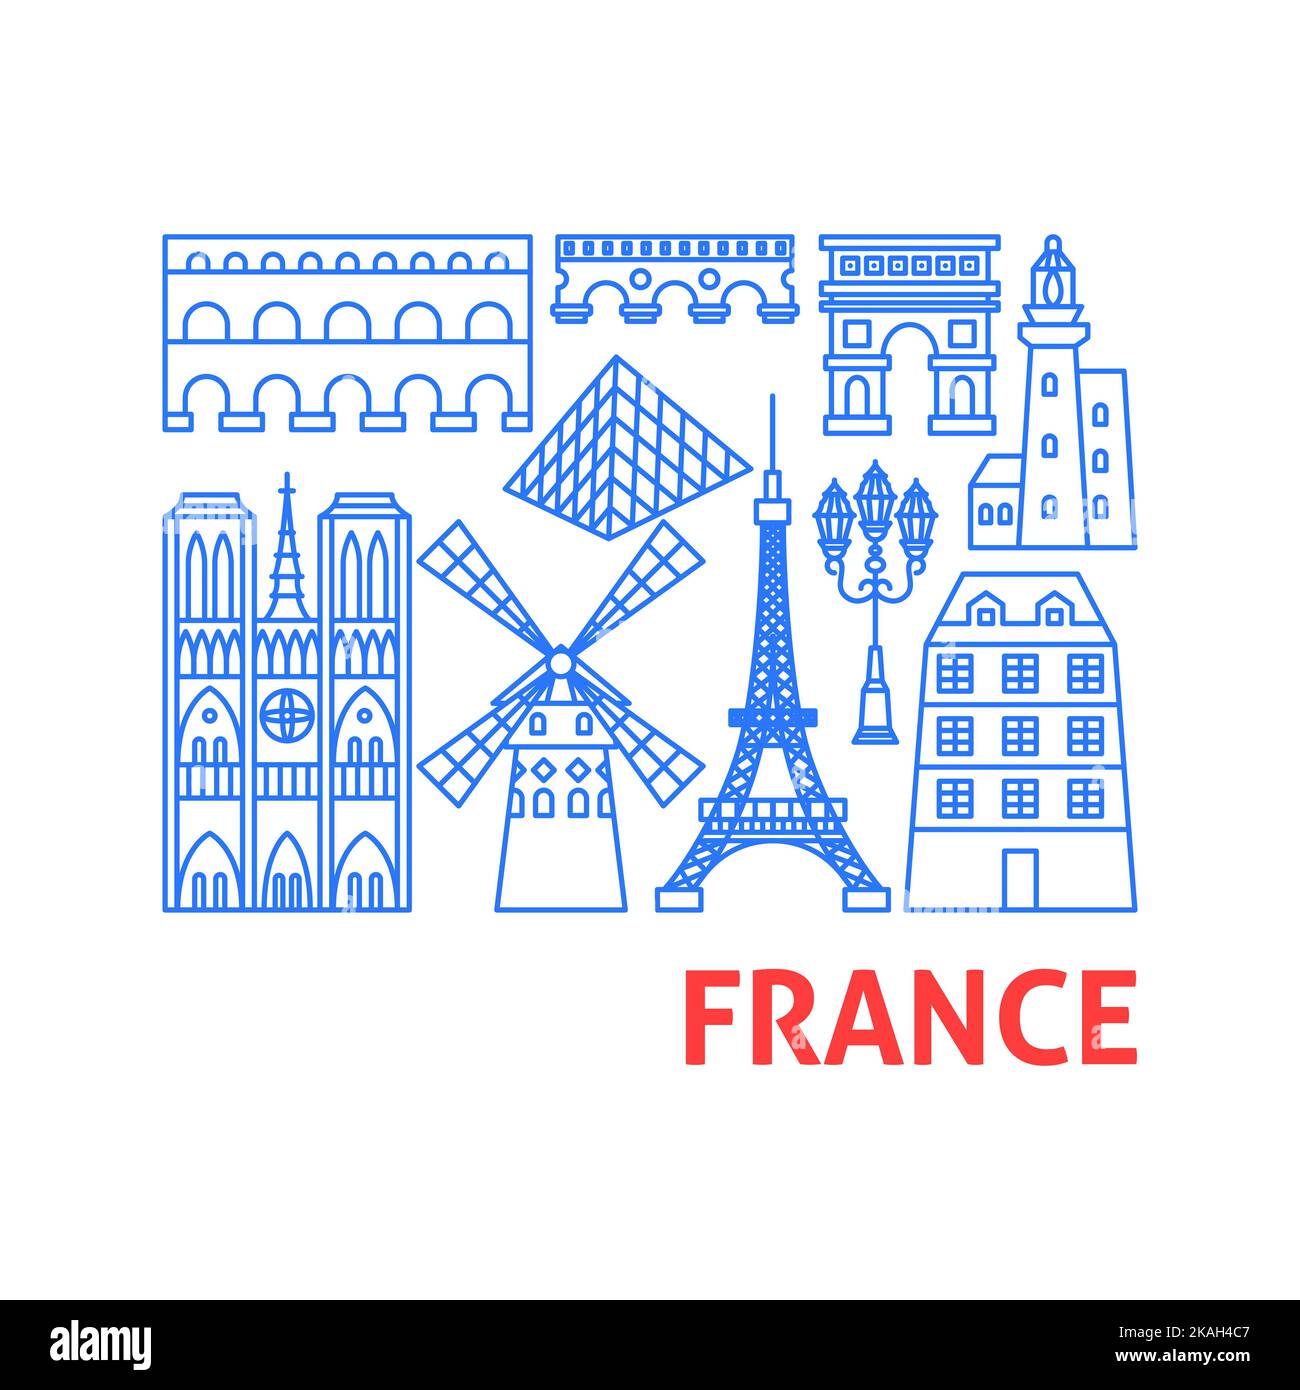 France Line Objects Stock Vector